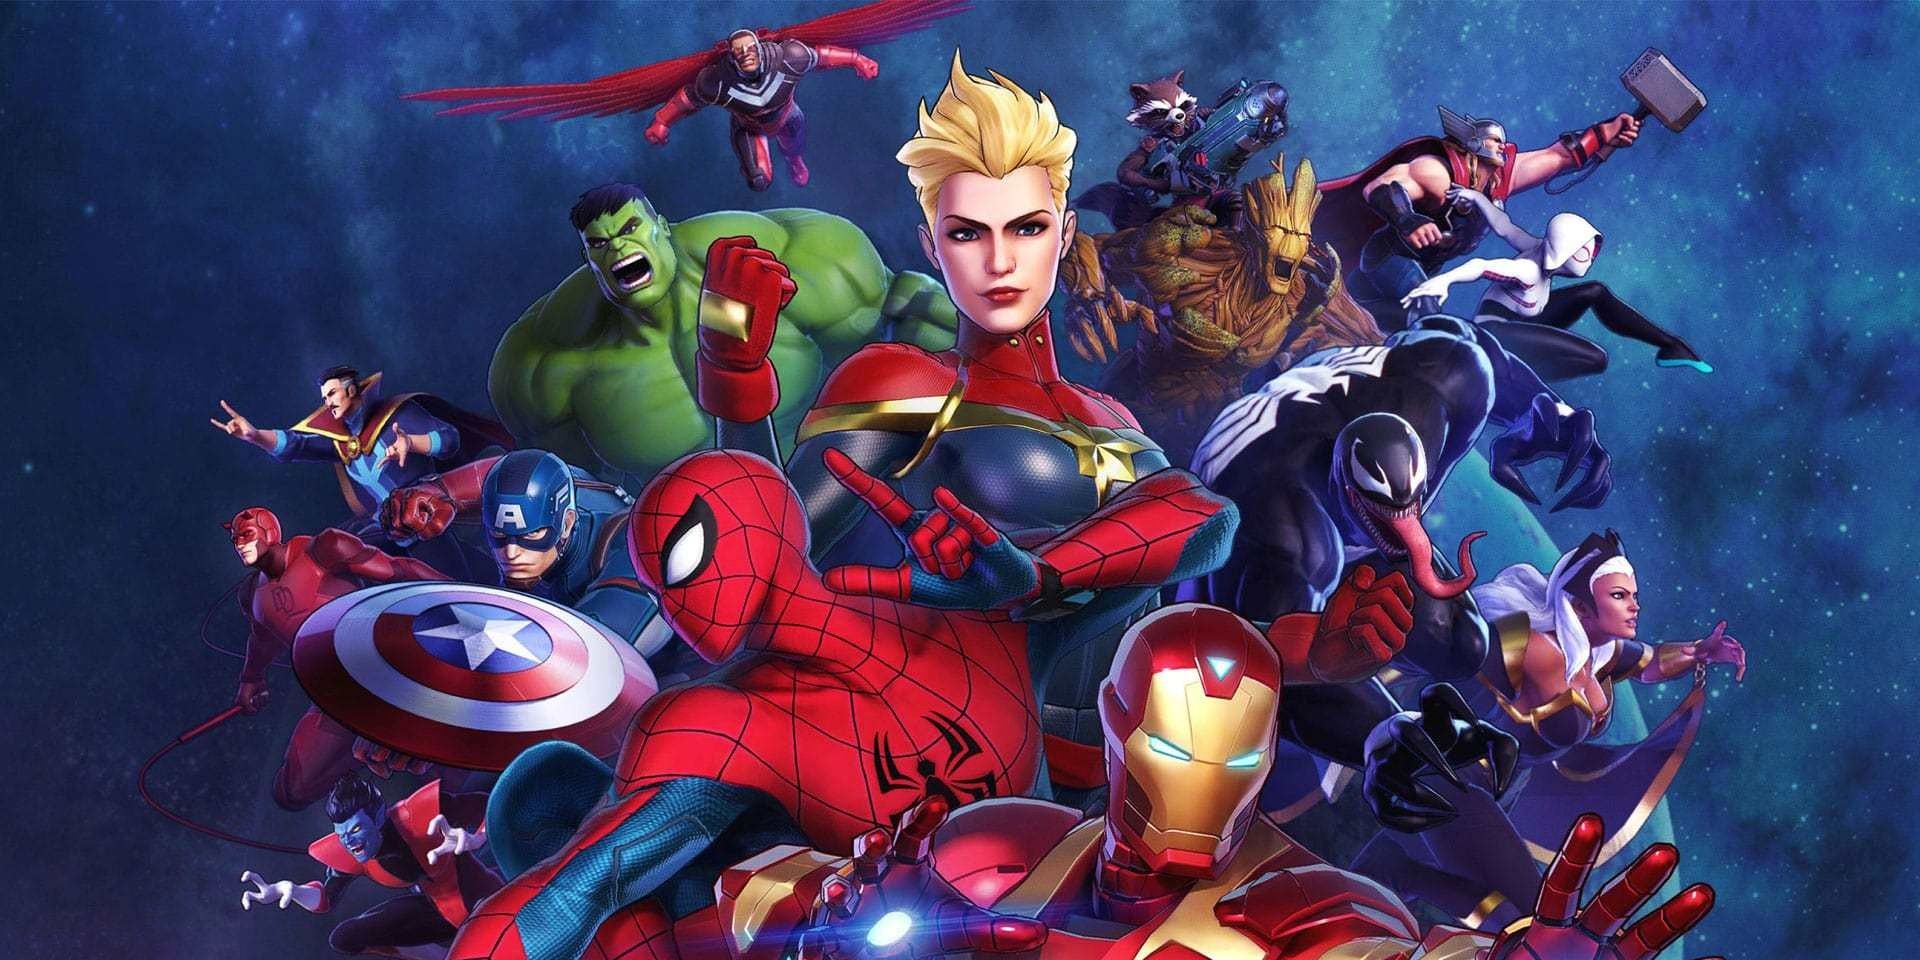 The Avengers Best Video Games Featuring the Superhero Team